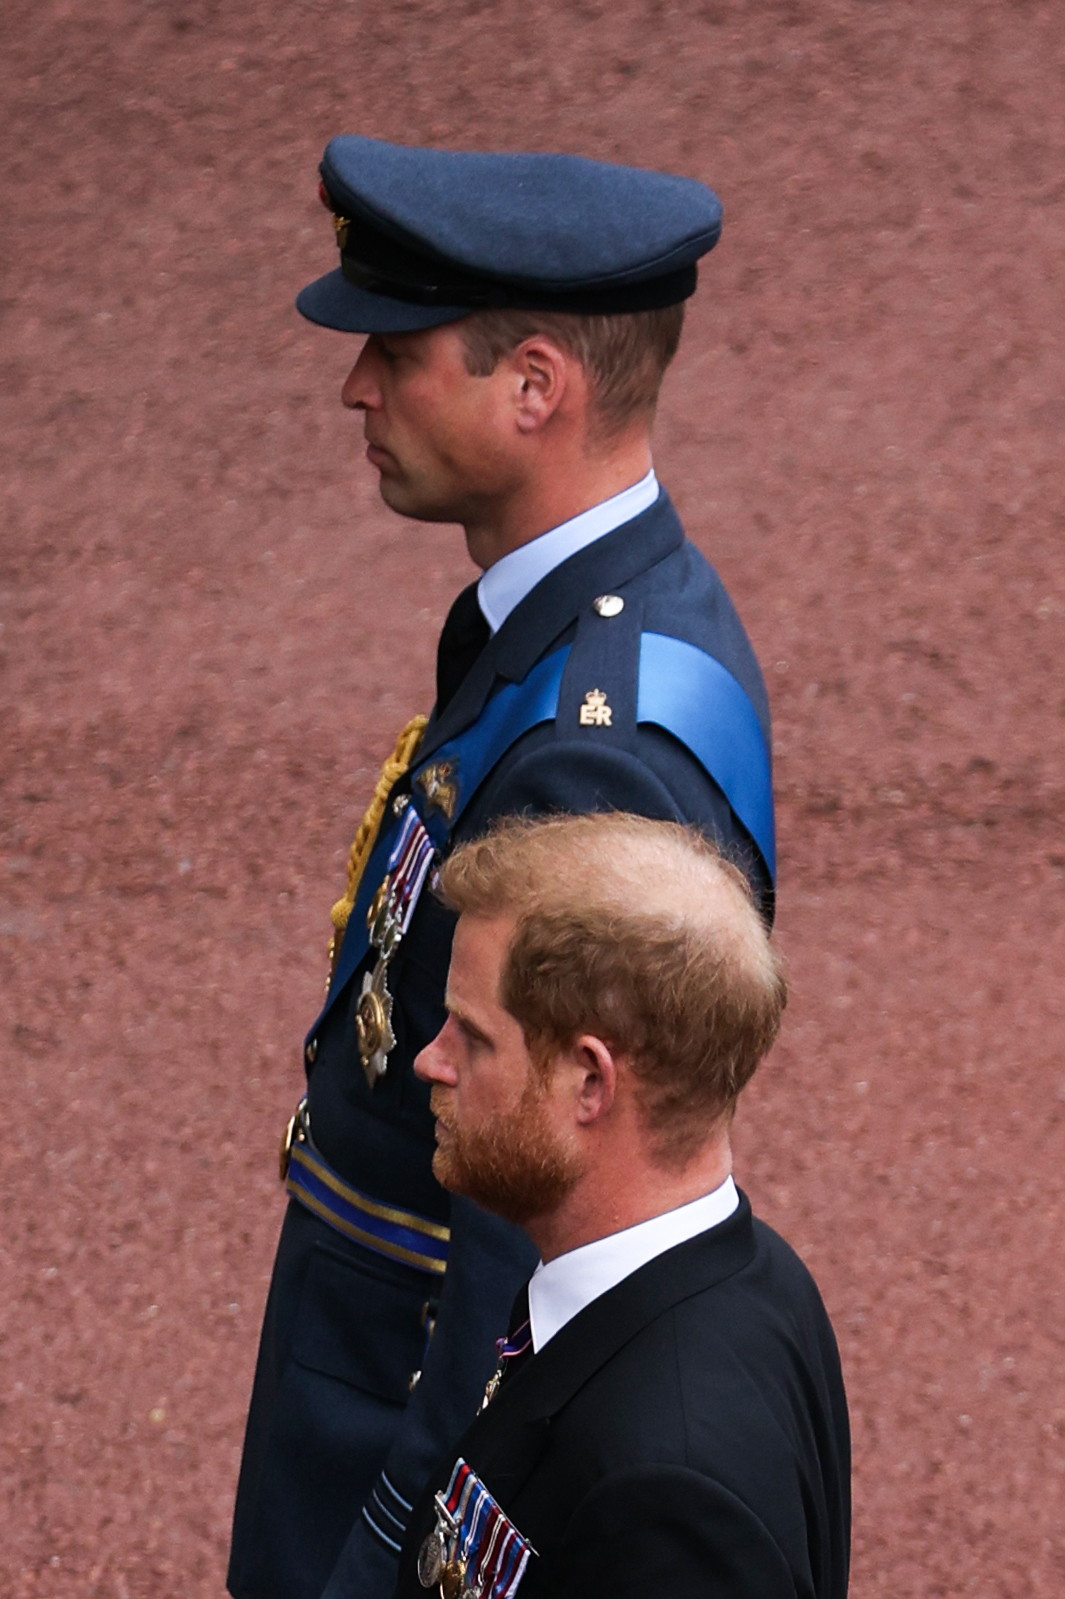 Prince William and Prince Harry during the Procession of the coffin of Queen Elizabeth II in London, England on September 19, 2022 in Windsor, England | Source: Getty Images